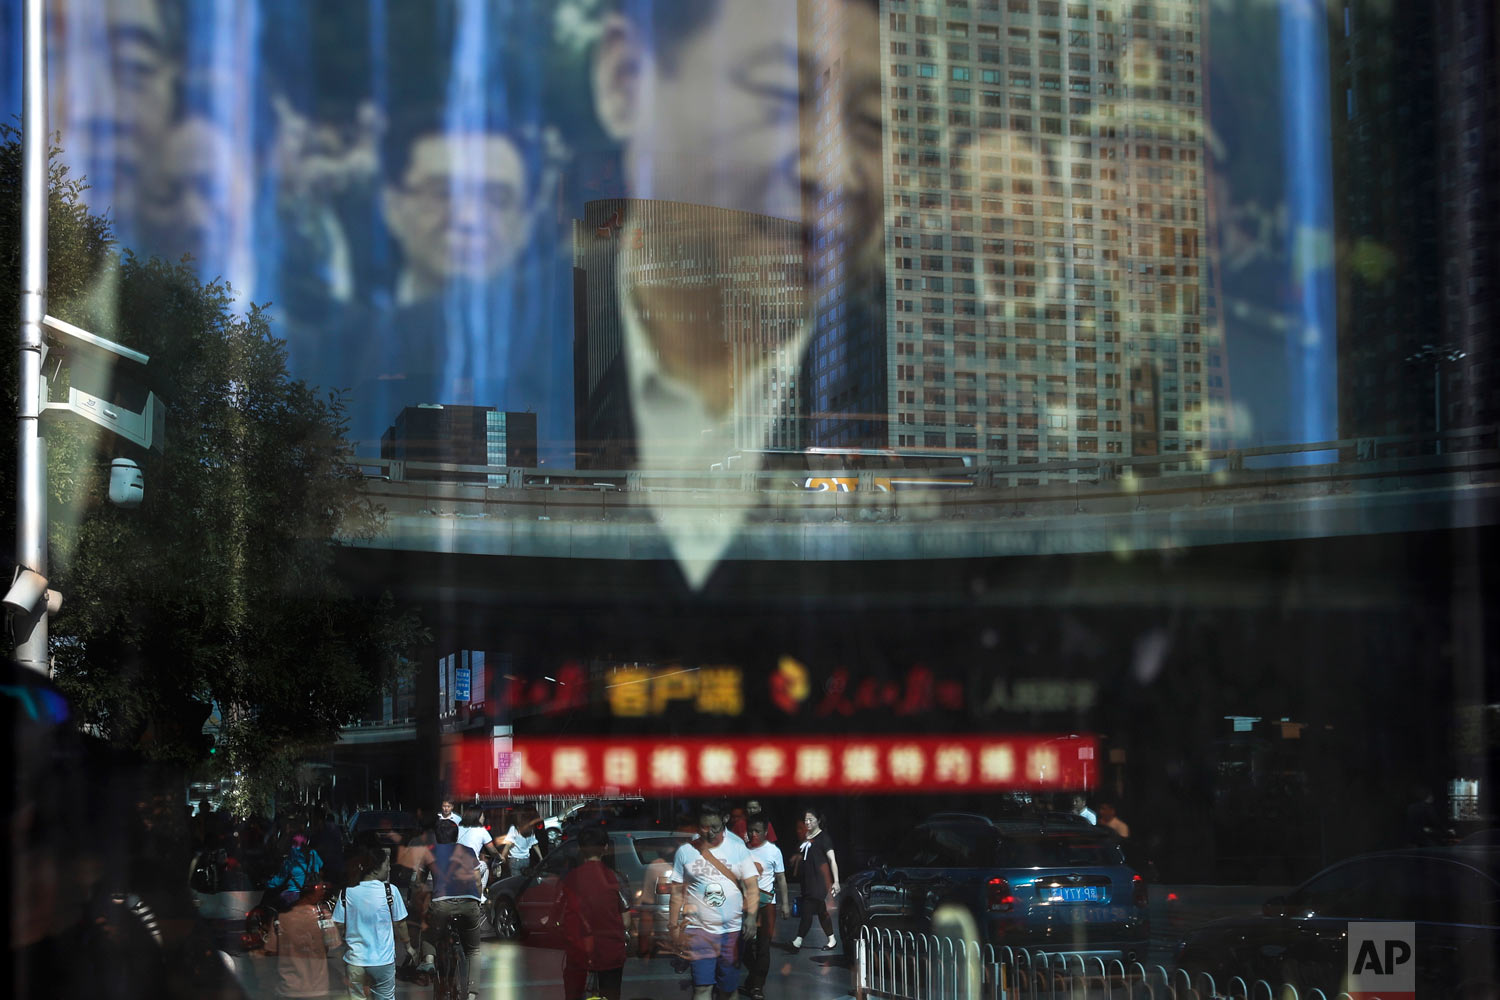  In this Wednesday, May 30, 2018, photo, people and motorists in morning rush hour are reflected on an electronic display panel advertising a video footage of Chinese President Xi Jinping near the Central Business District in Beijing. Chinese factory activity grew at its fastest rate in eight months on stronger demand, a survey showed Thursday, May 31, 2018 in a positive sign for the world's No. 2 economy despite trade tensions with the U.S. China's services industry is playing a bigger role as communist leaders upgrade economic growth, shifting it from a worn-out model based on wasteful trade and investment to one focused on domestic spending. (AP Photo/Andy Wong) 